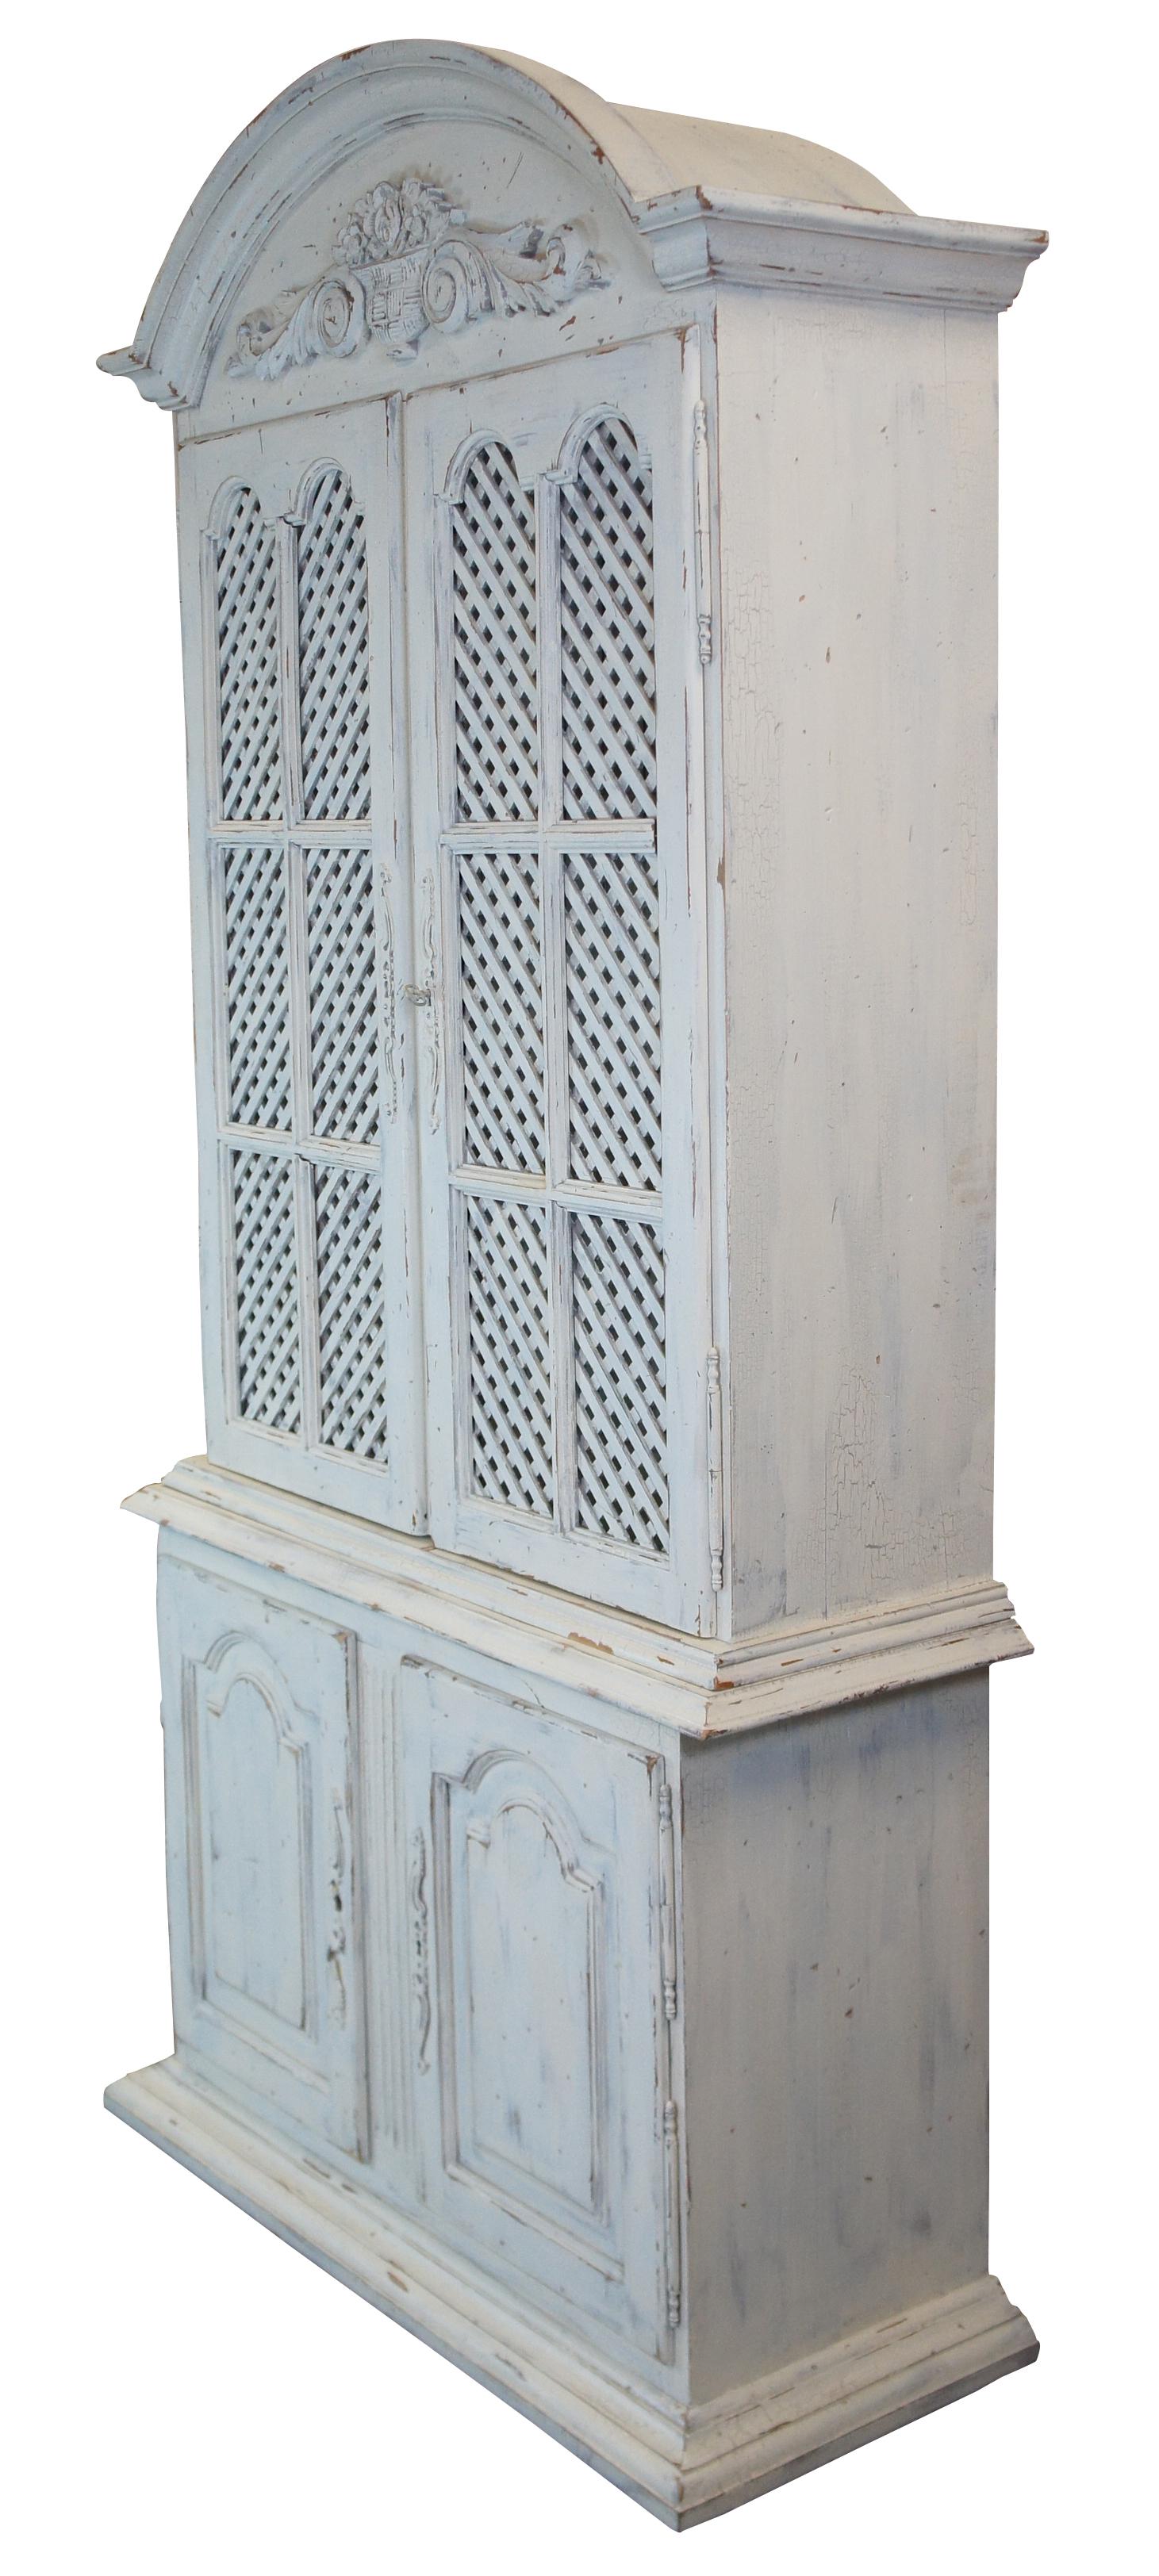 Vintage painted pine china hutch or bookcase by Garcia Imports, circa 1980s. Features a French Country or buffet deux design with lattice doors, an arched top with floral carving and plenty of shelving for storage. Includes Iron escutcheon with